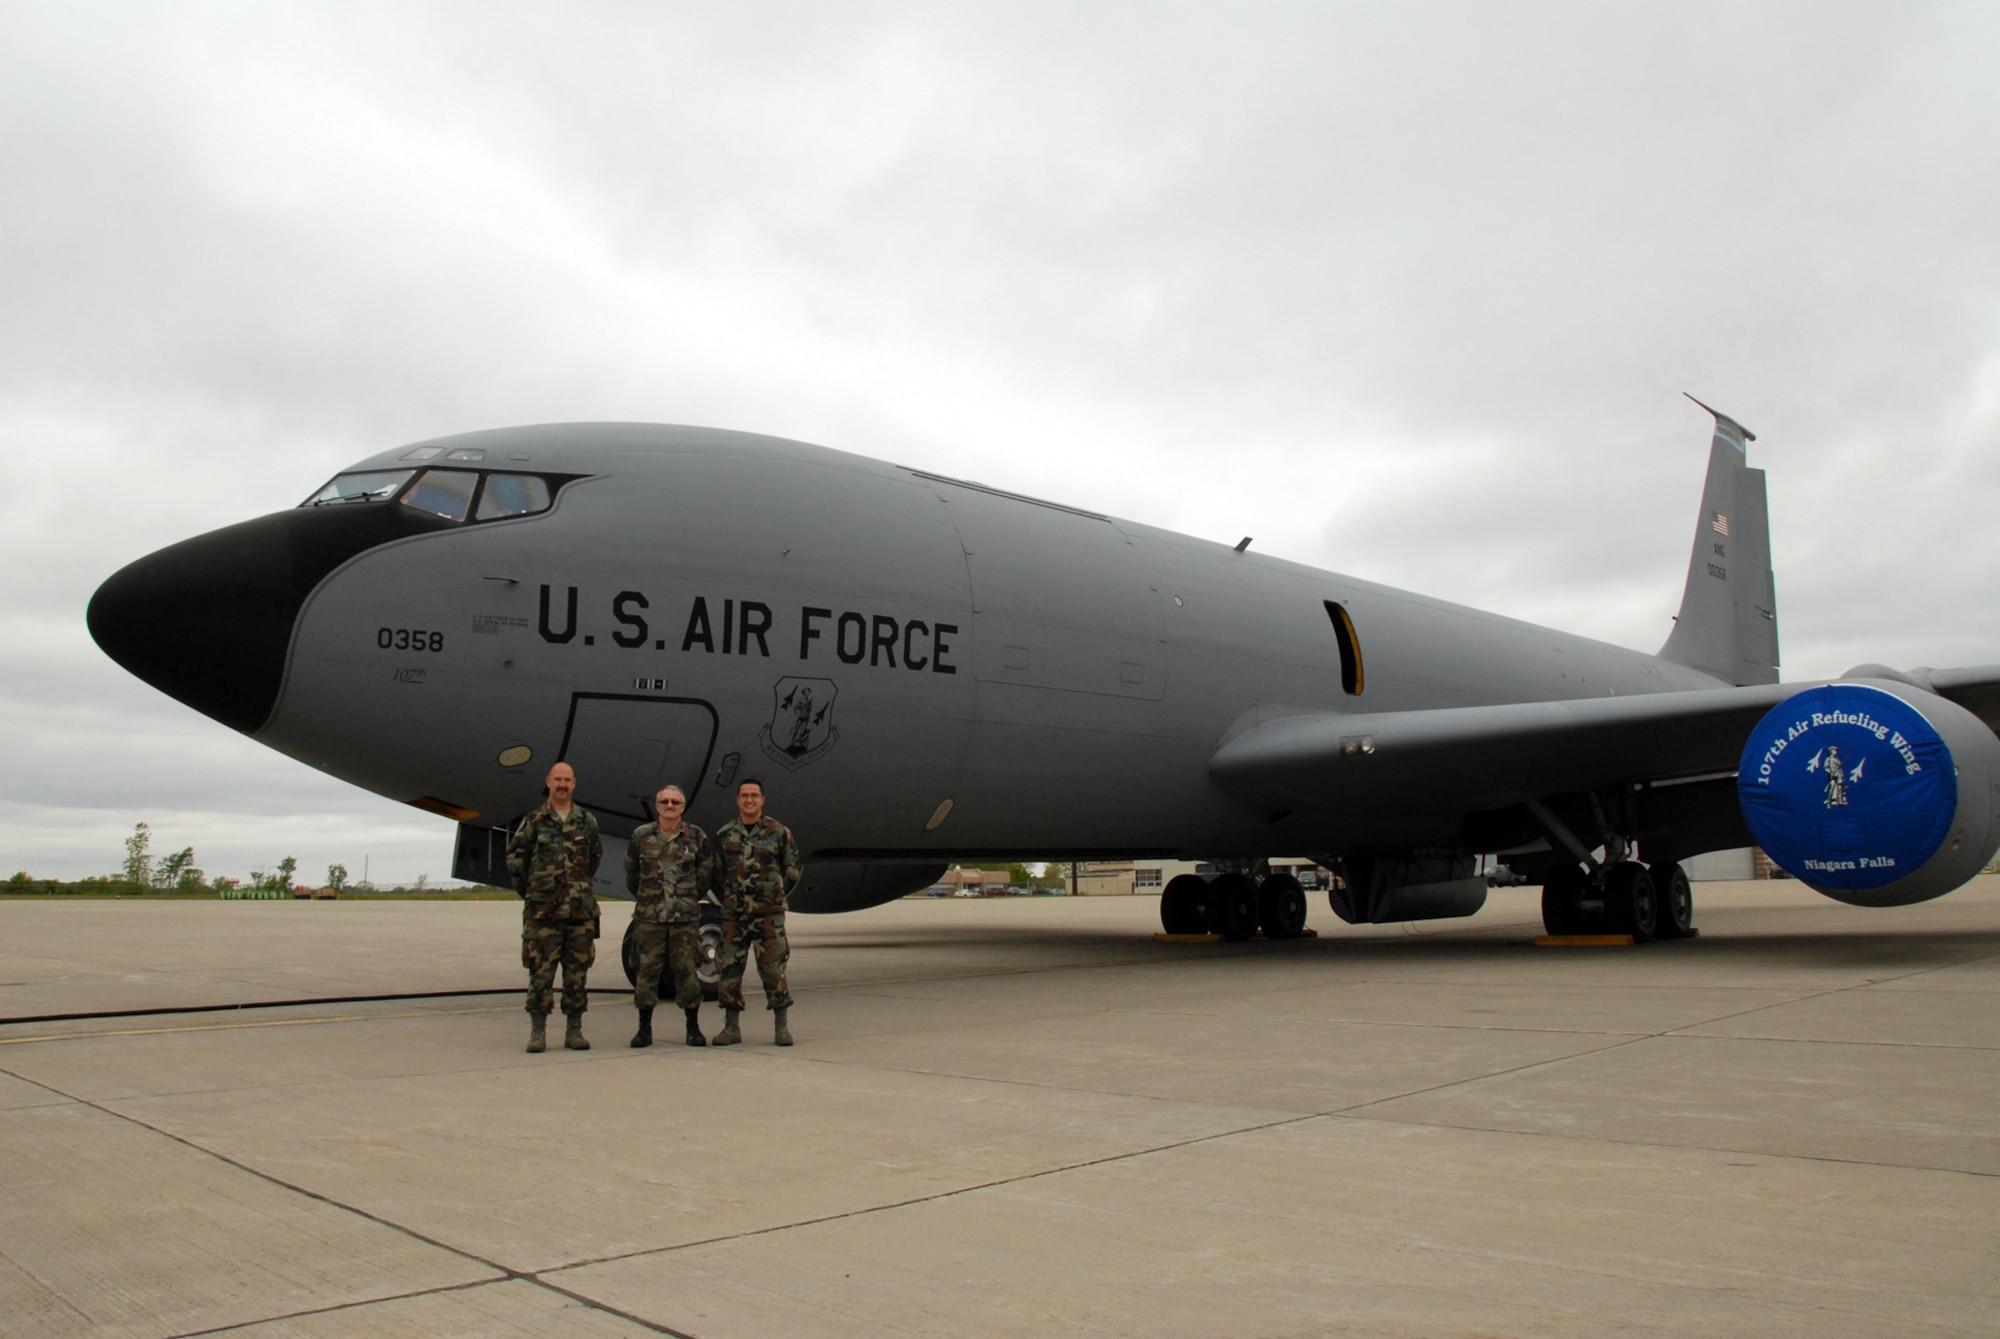 107th Airlift Wing crew chiefs TSgt Robert Albrecht, MSgt Stephen Linza,SSgt Anthony Re pose for the last time with aircraft 0358. Under BRAC the the 107th will lose all their KC-135R models and convert to the C-130H2 aircraft.